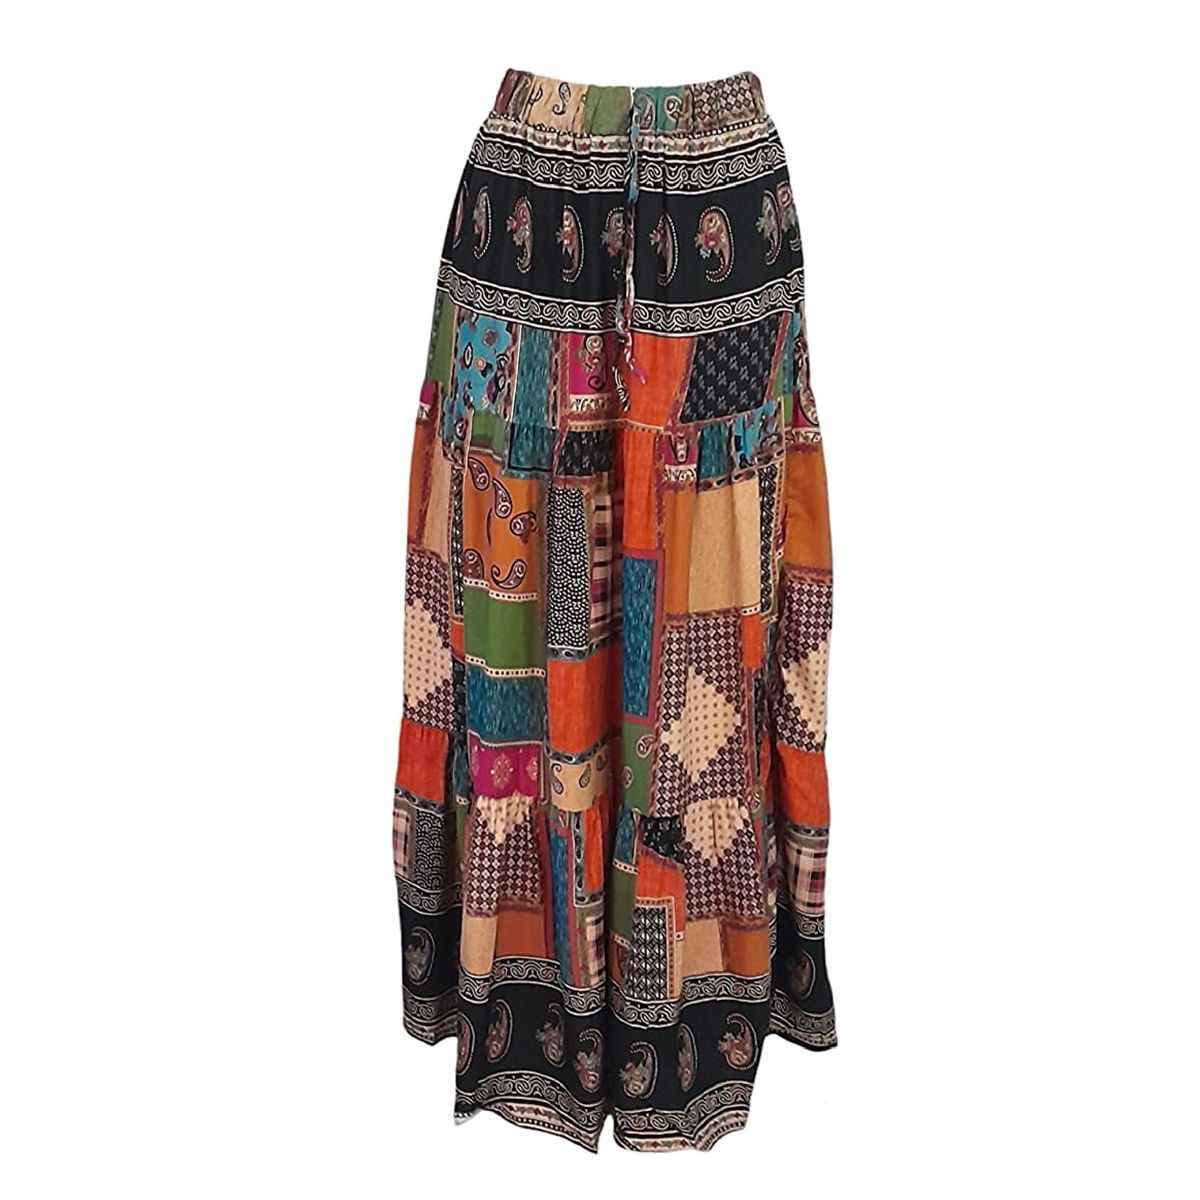 Ladies Summer Skirt - Red Multi-Pattern Patch | Shop Today. Get it ...